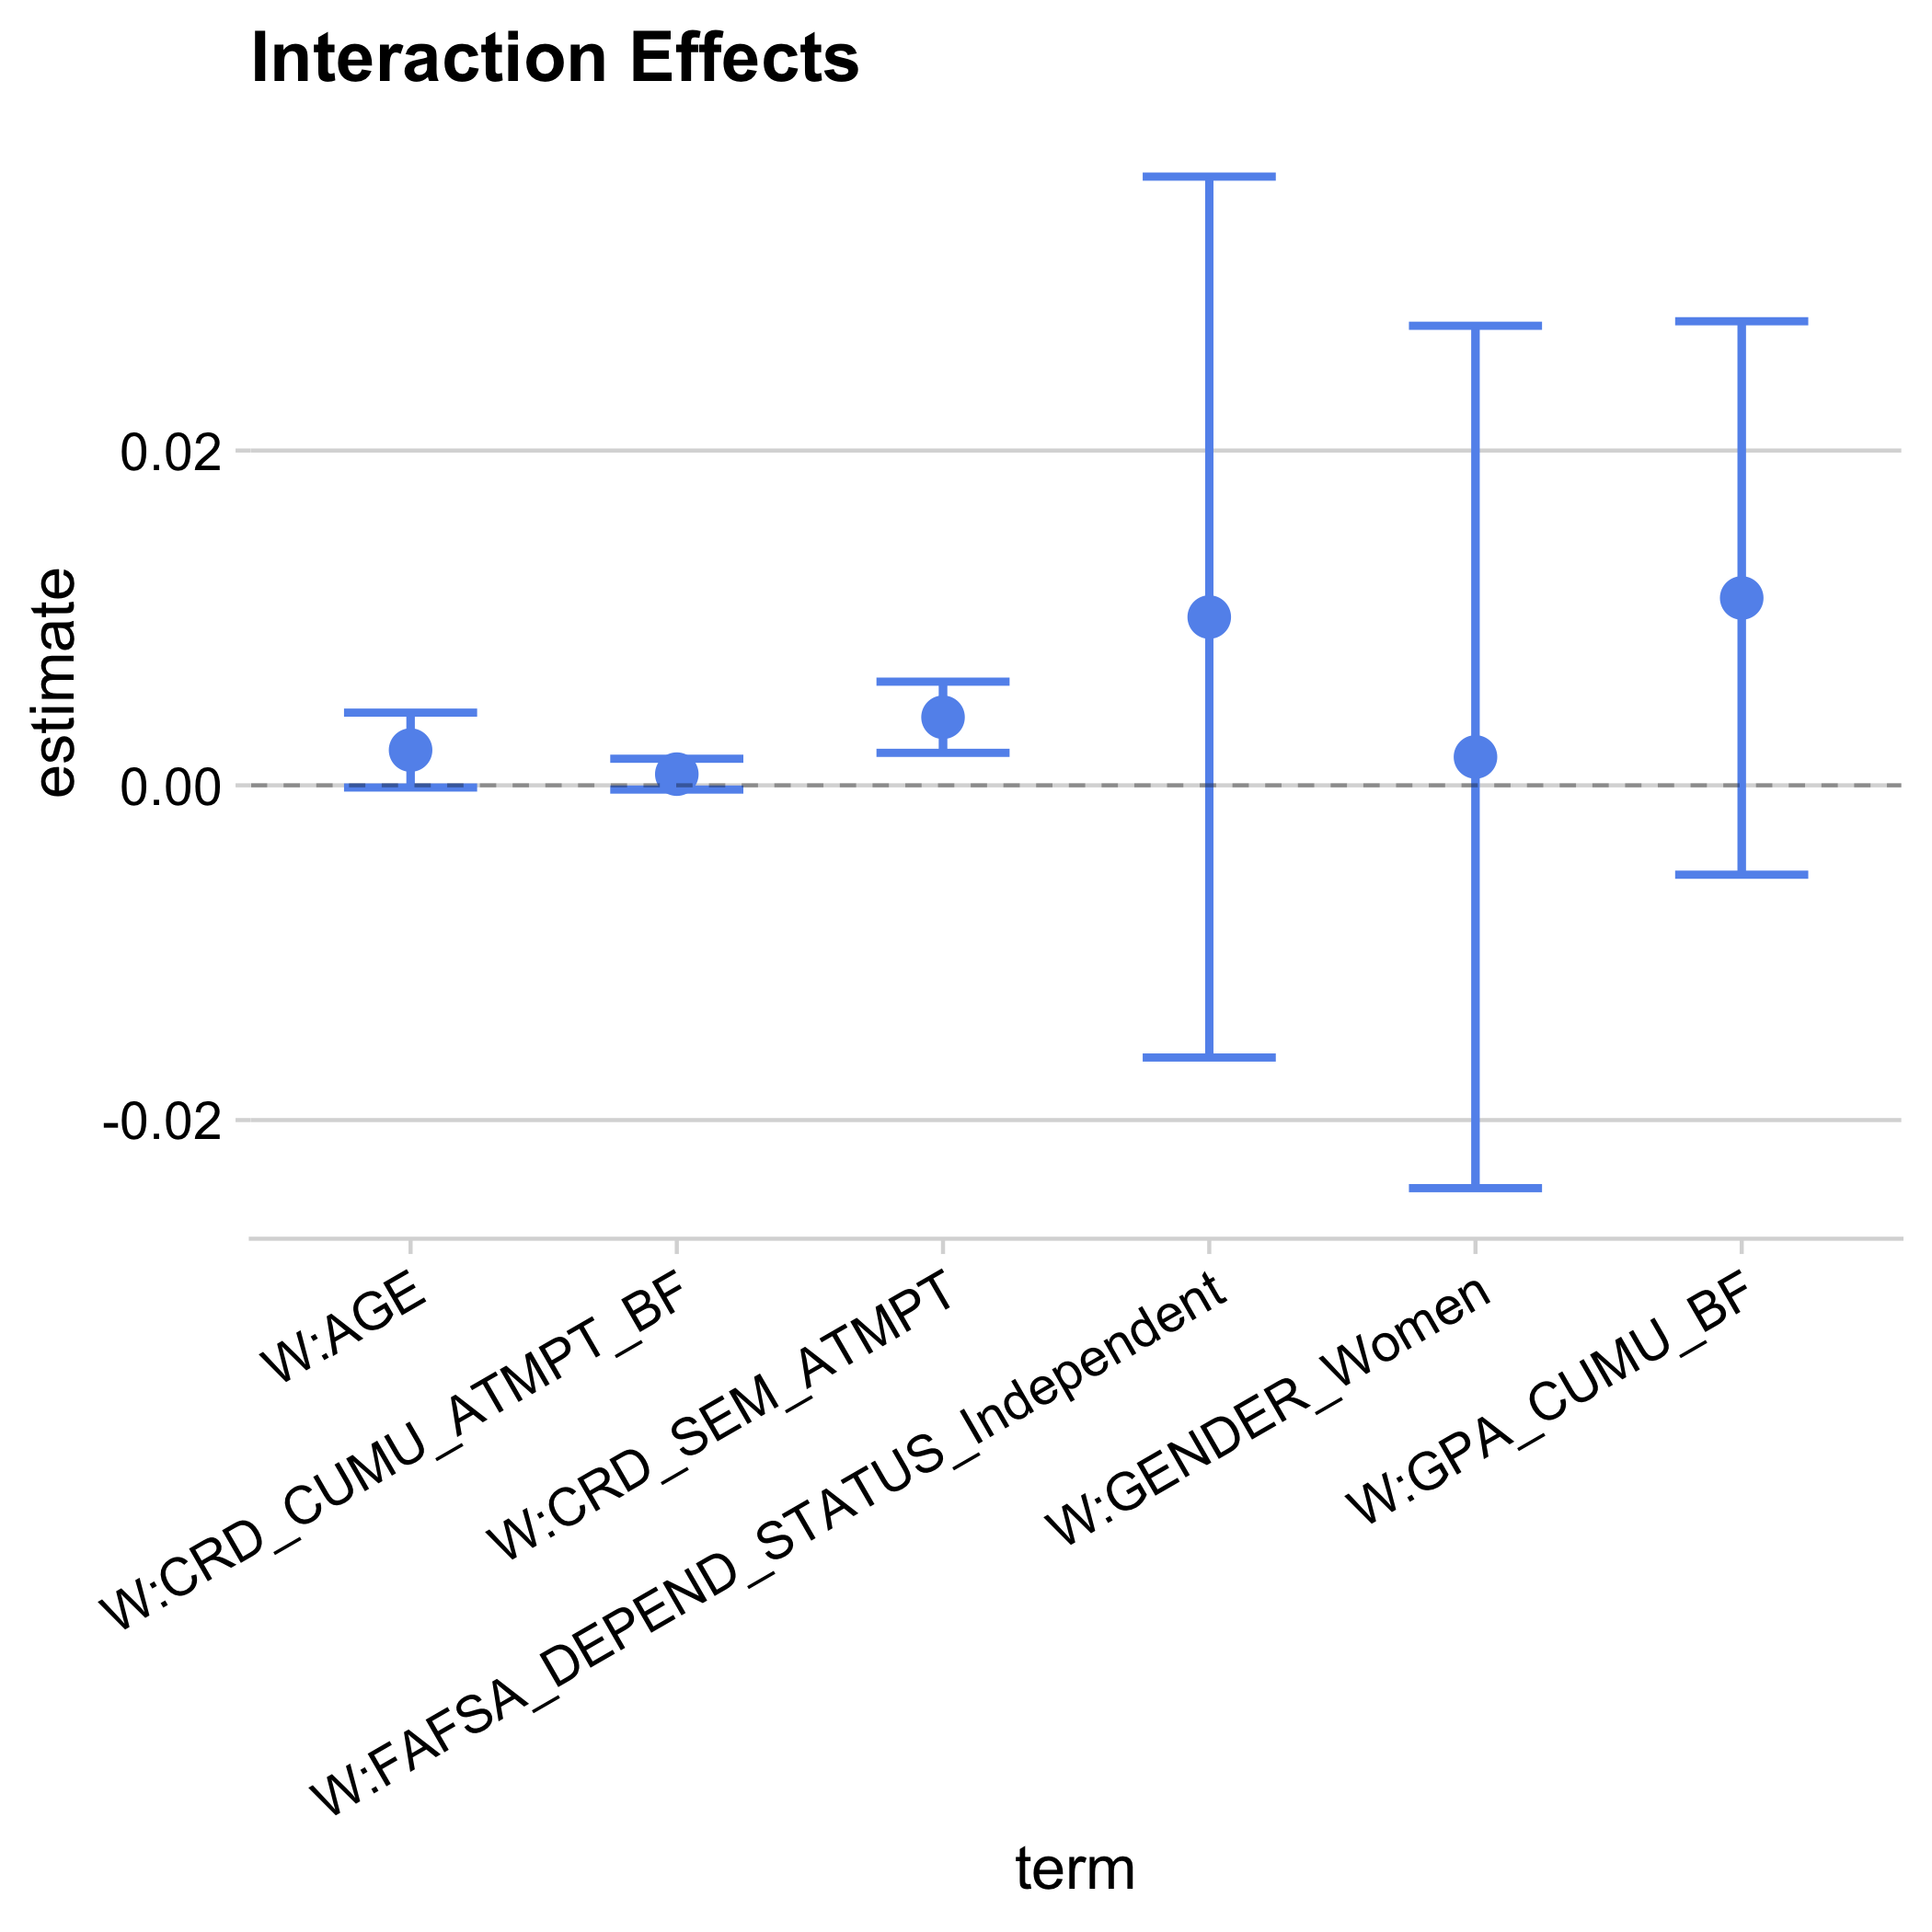 Regression coefficients of treatment–covariate interaction terms from separate linear regressions of filing by the priority deadline on treatment, one of the pre-specified covariates, and the respective treatment–covariate interaction, with 95% confidence intervals. The covariates are student age at the start of the intervention (AGE), the cumulative credits attempted at the beginning of the invention term (CRU_CUMU_ATMPT_BF), the credits attempted in the semester of the intervention (CRD_SEM_ATMPT), whether the student previously filed independently of the student's parents (FAFSA_DEPEND_STATUS_Independent), whether the student is female (GENDER_Women), and the student's cumulative GPA at the beginning of the intervention semester (GPA_CUMU_BF).